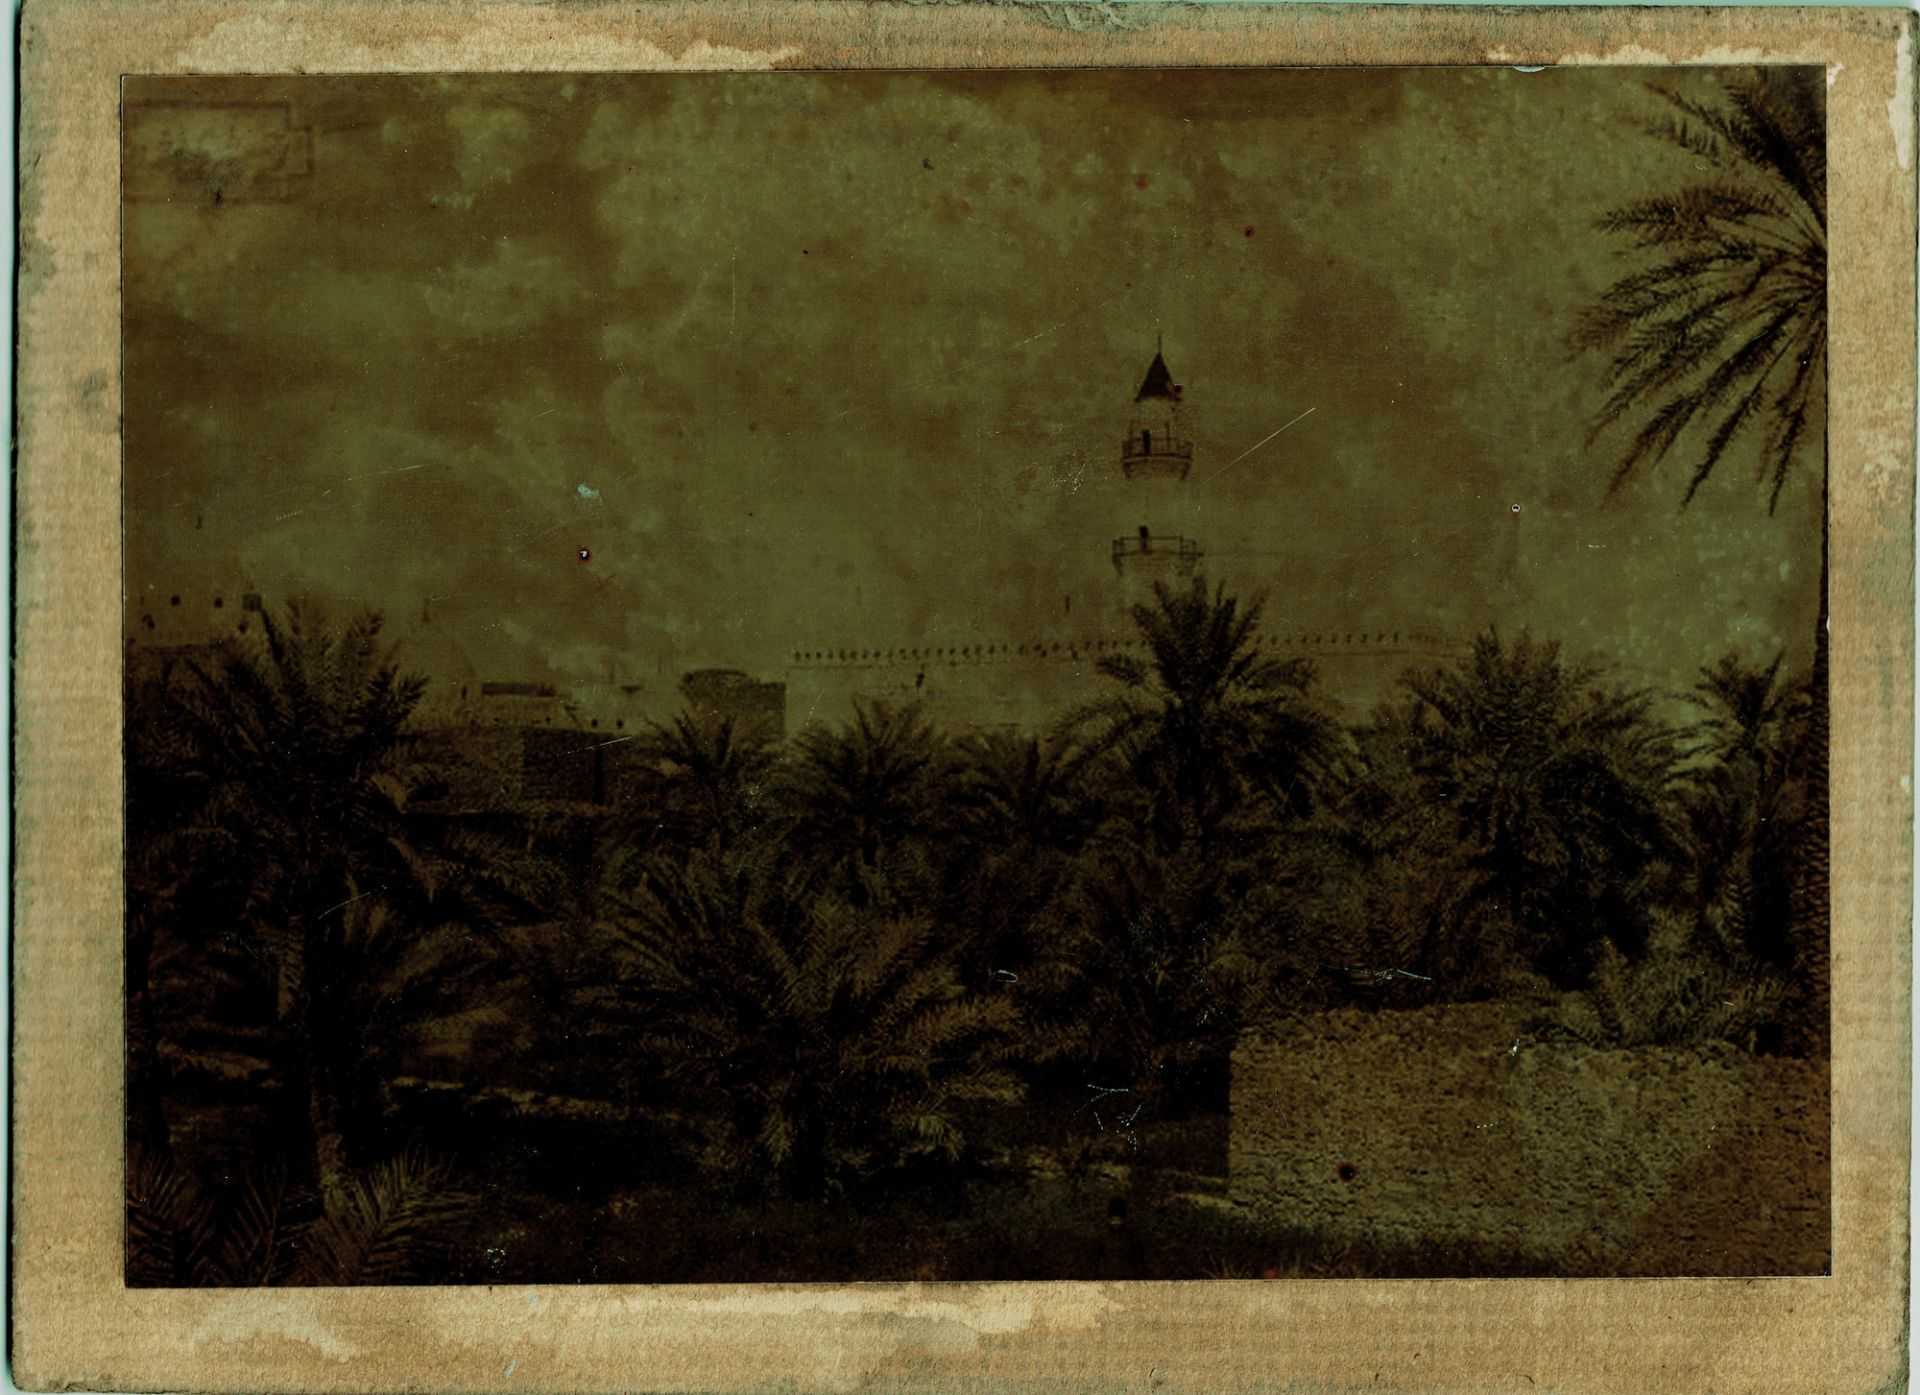 A COLLECTION OF SEVEN OLD PHOTOGRAPHS OF MECCA, MEDINA, THE MAHMAL AND THE HAJJ, EARLY 20TH CENTURY - Image 3 of 8